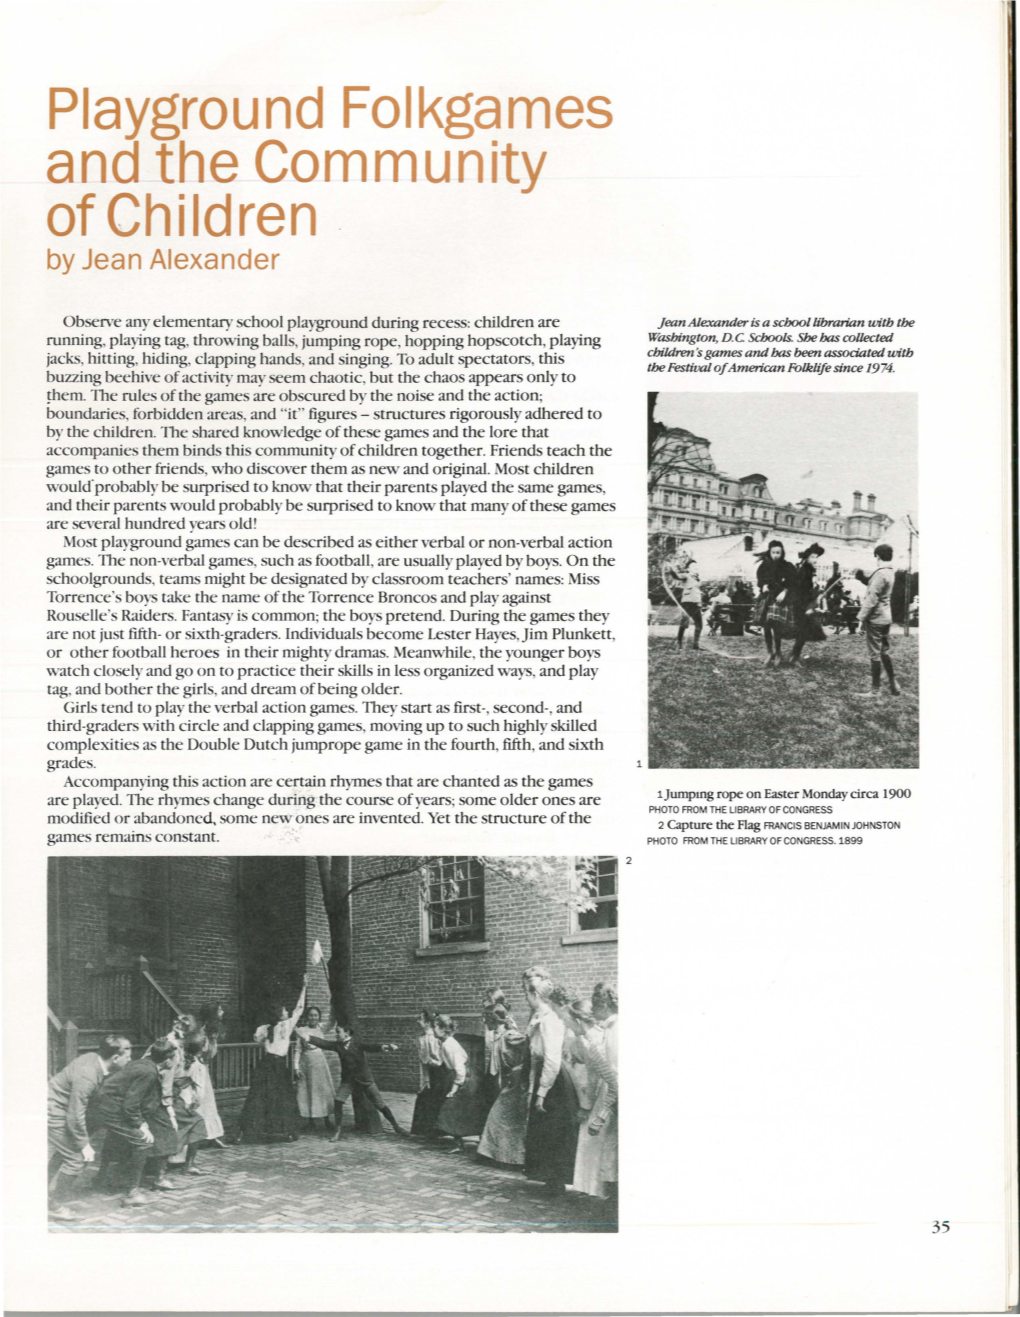 Playground Folkgames and the Community of Children by Jean Alexander